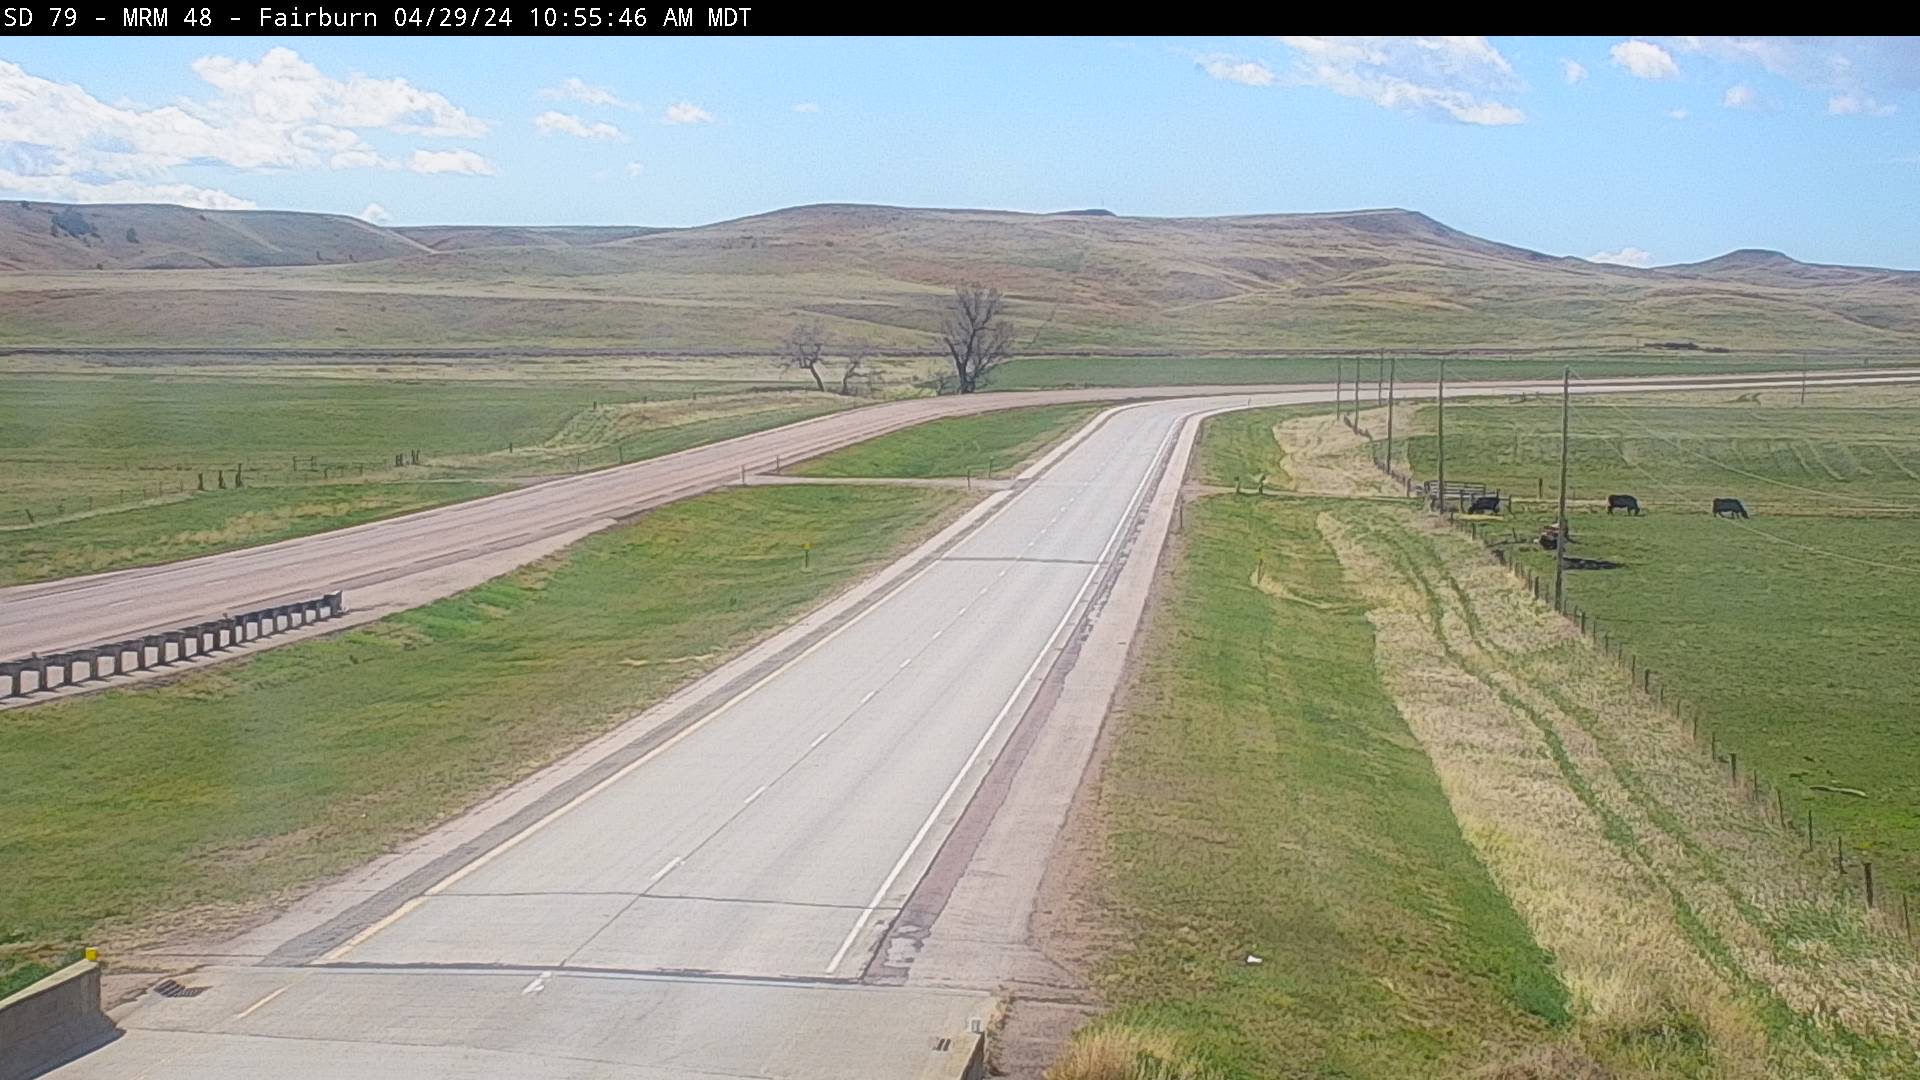 Traffic Cam along SD-79 - South Player